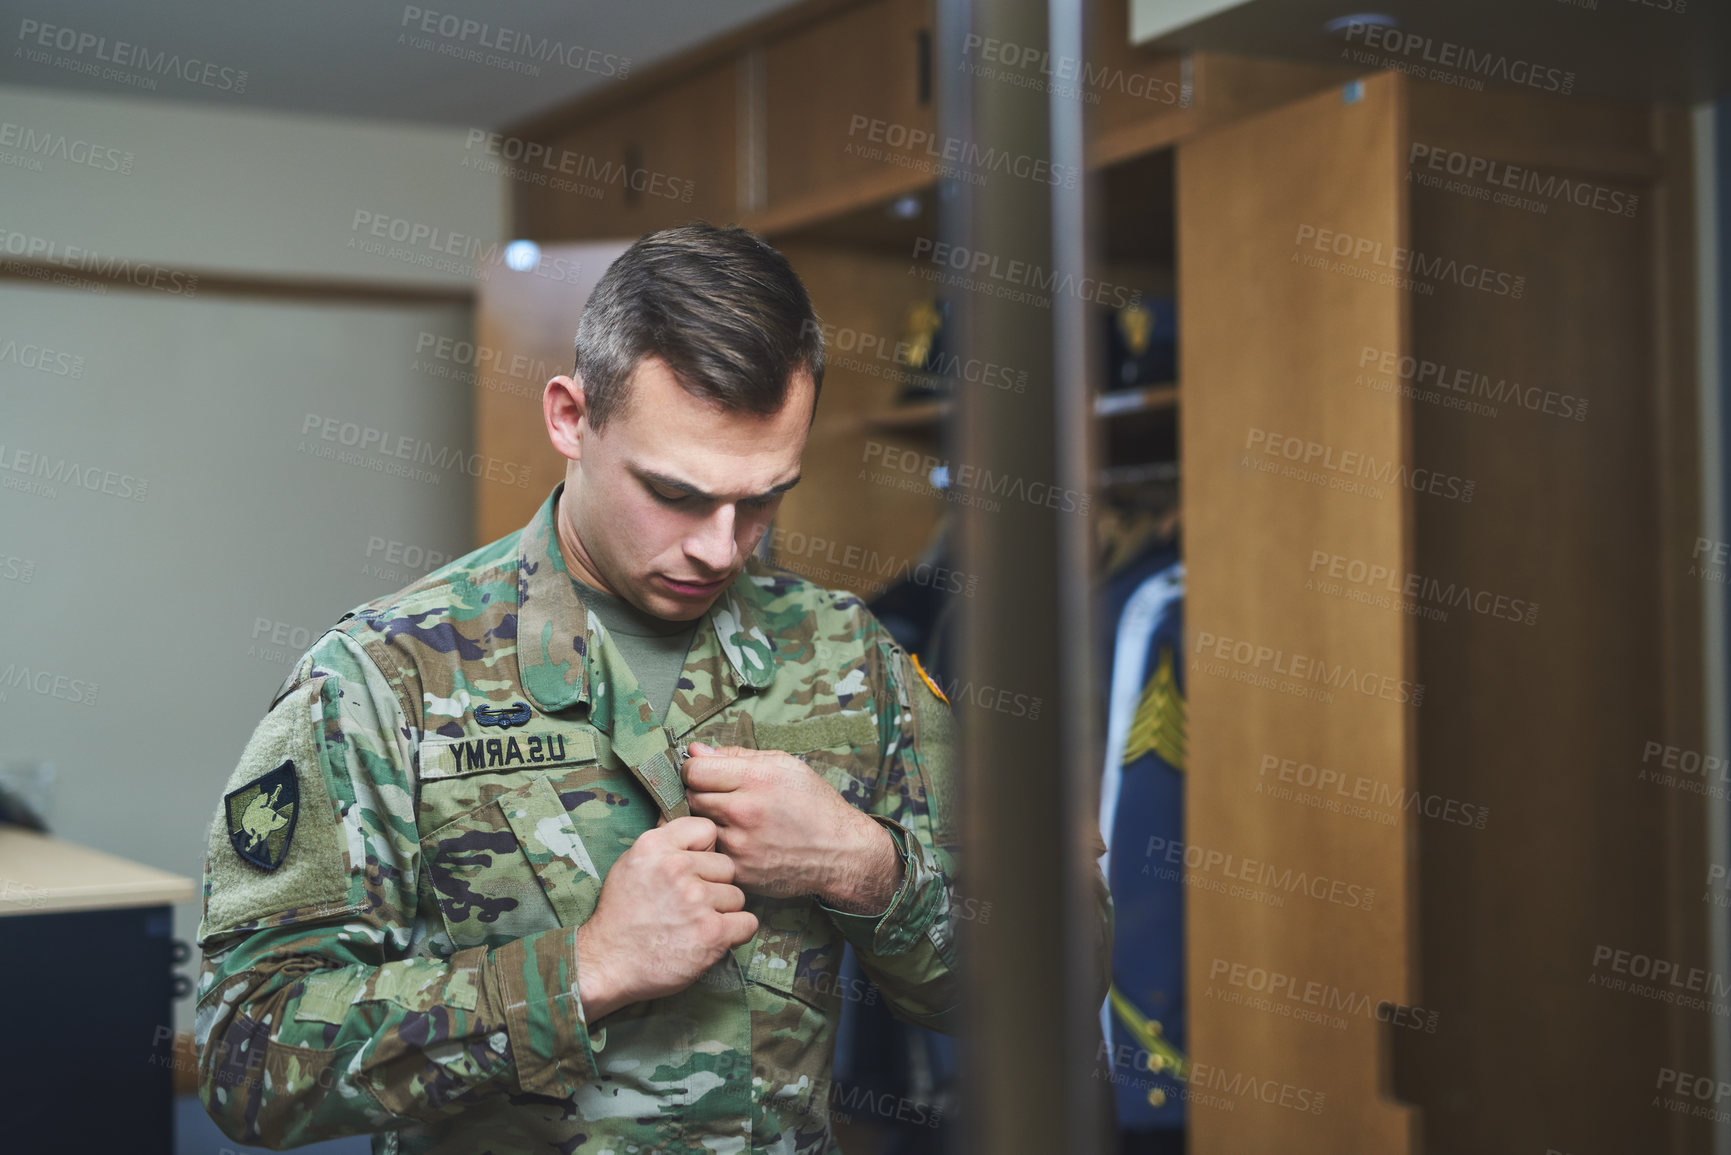 Buy stock photo Shot of a young soldier standing getting dressed in the dorms of a military academy